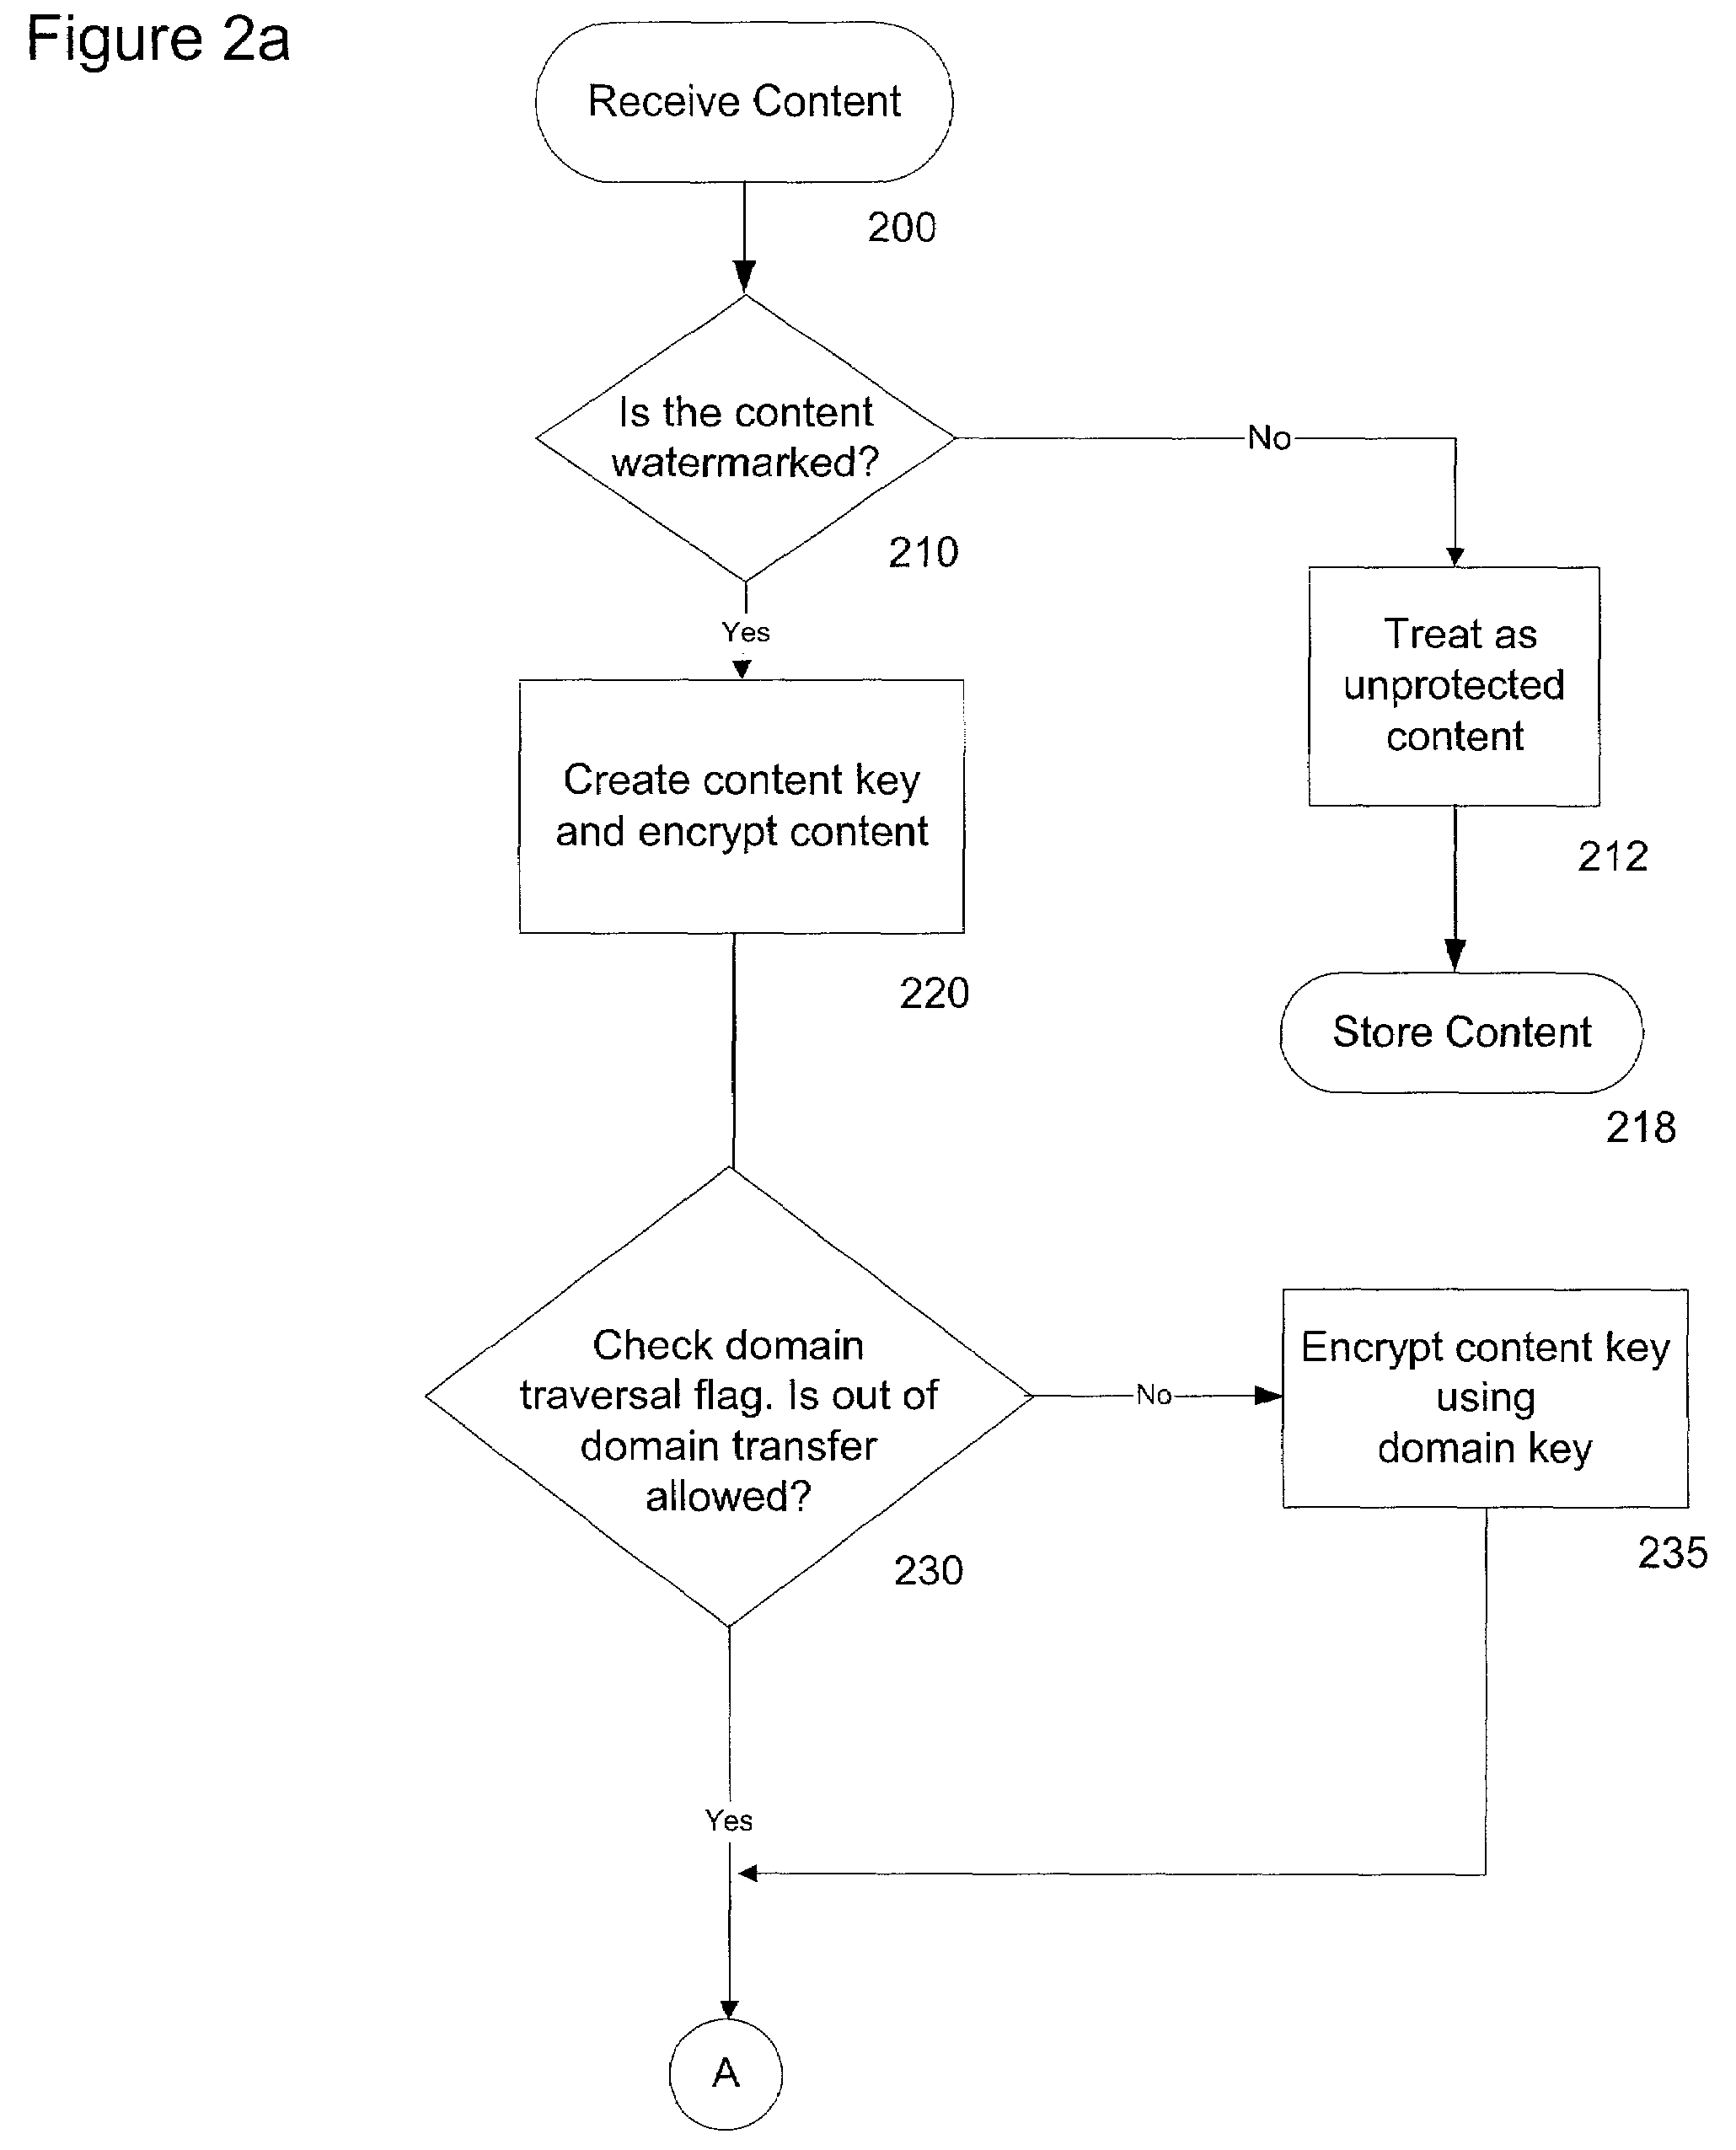 System and method for controlled copying and moving of content between devices and domains based on conditional encryption of content key depending on usage